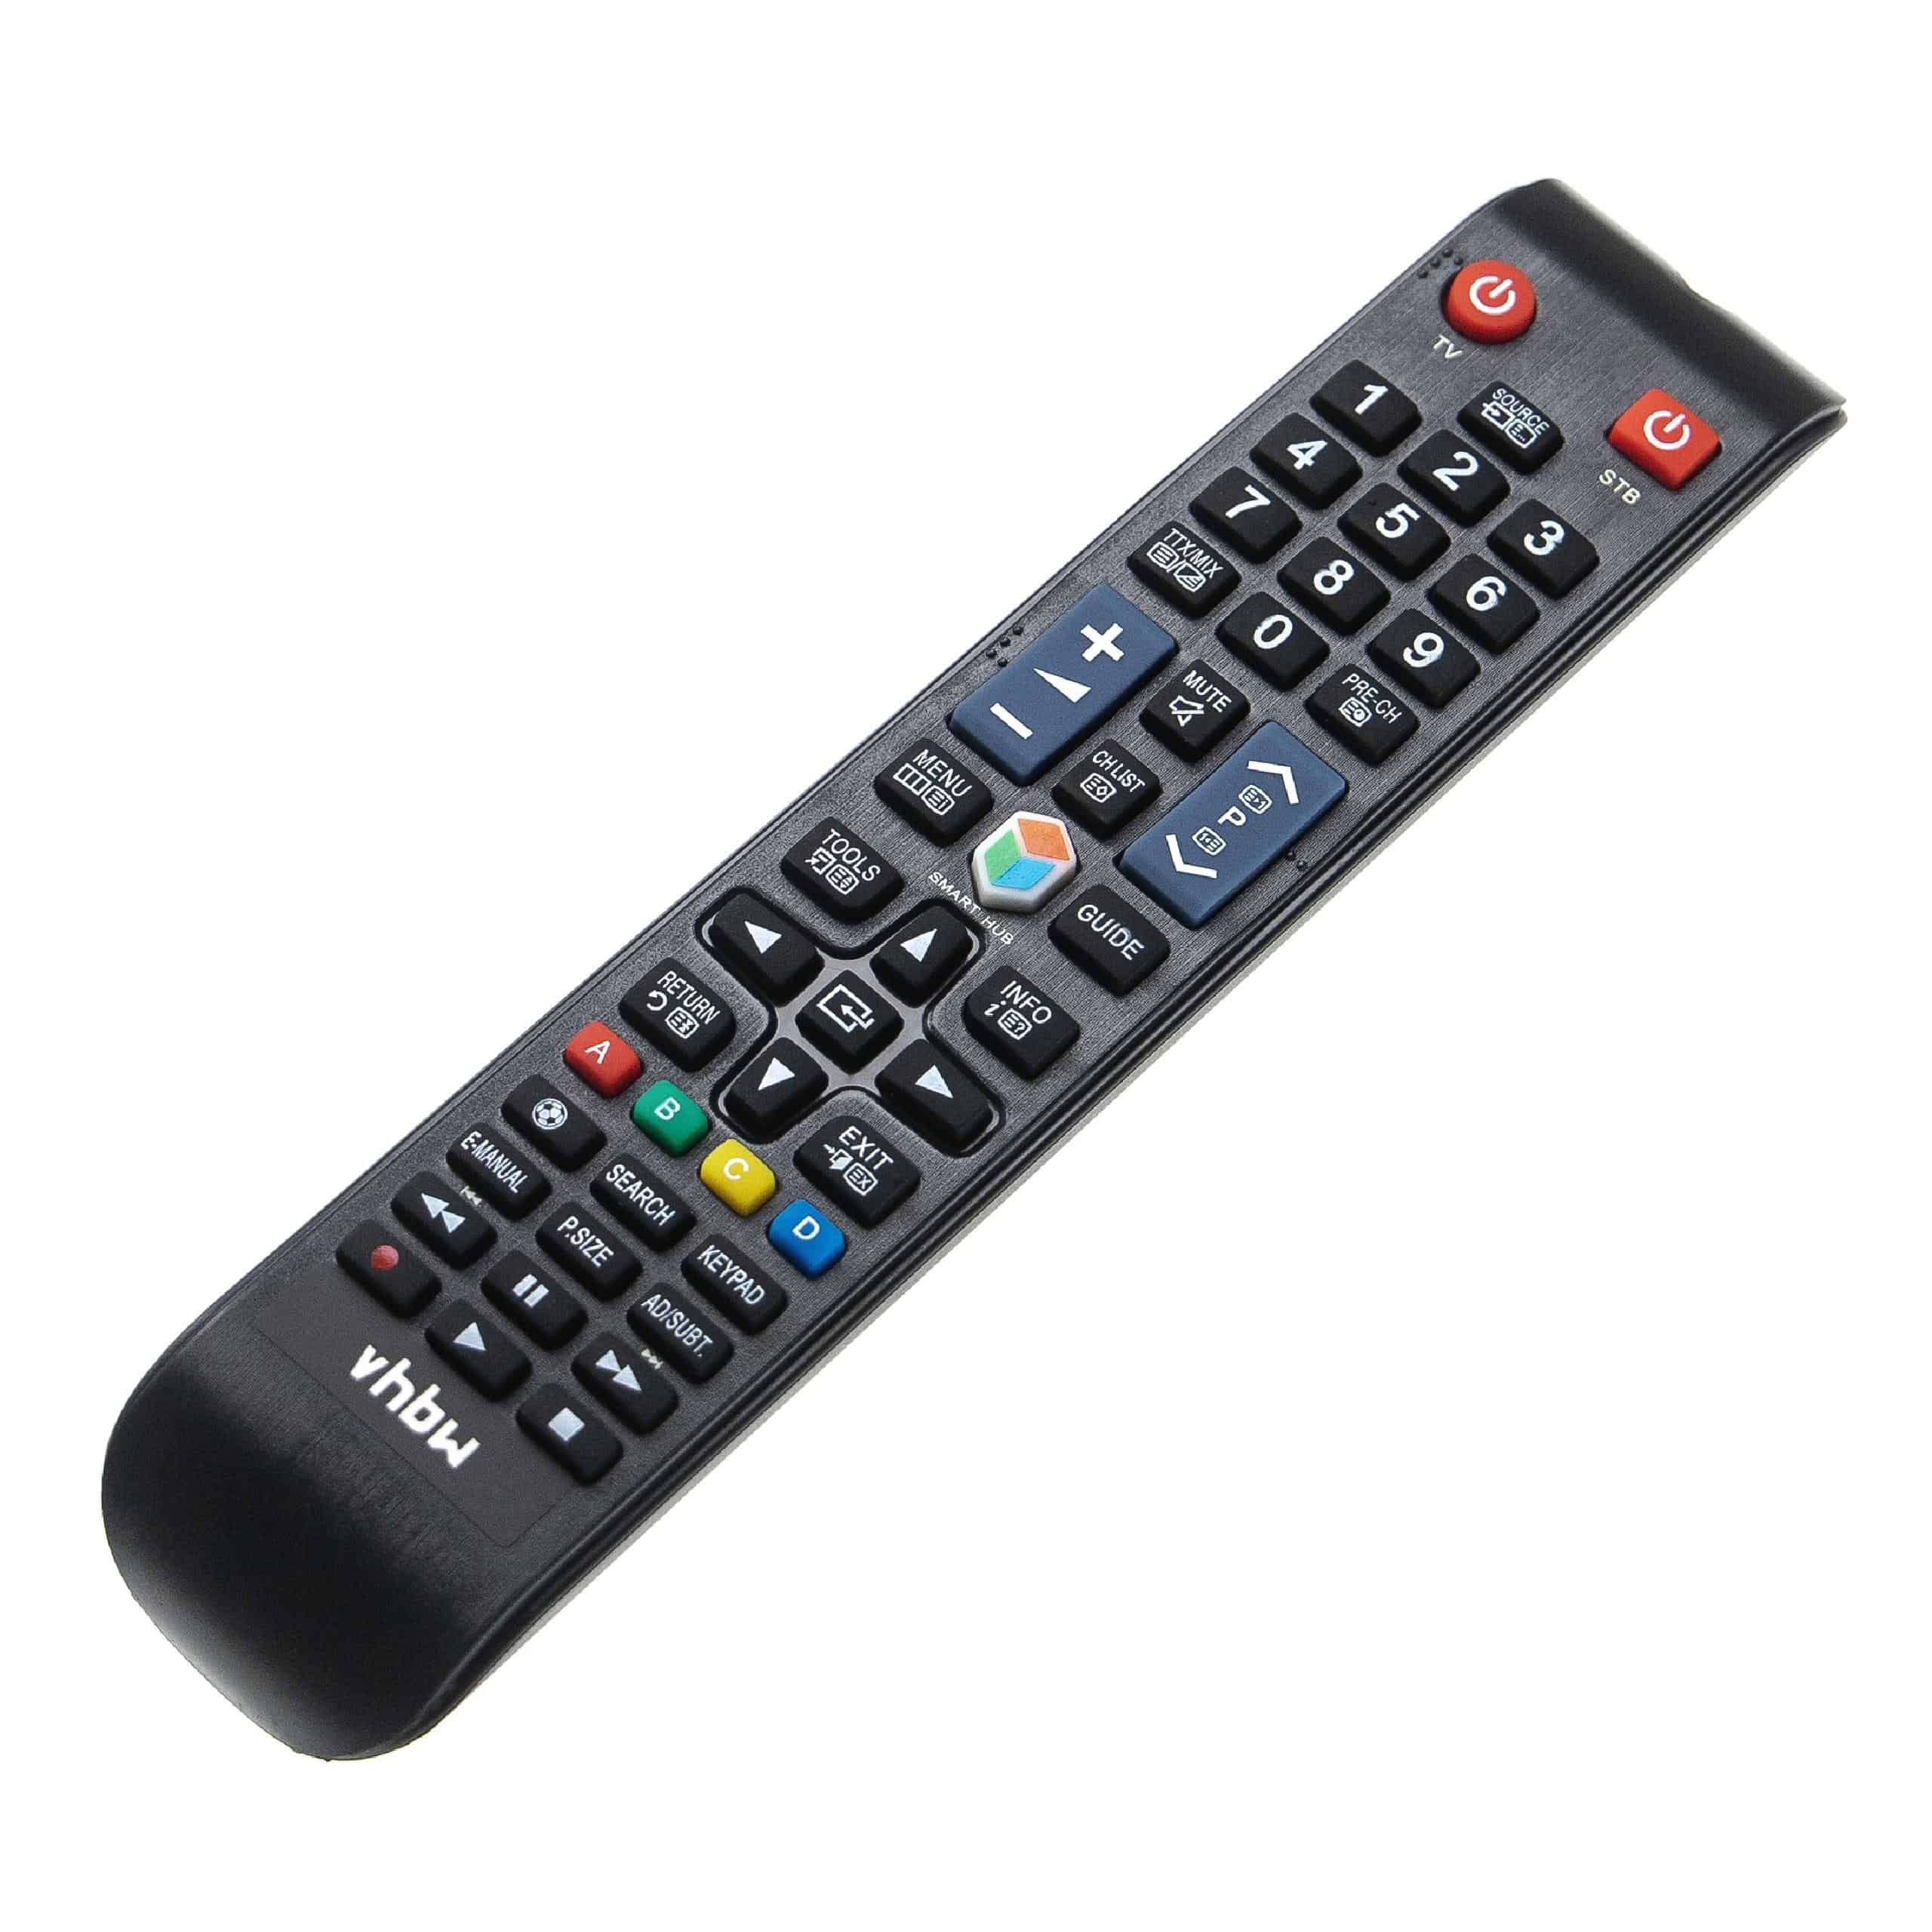 Remote Control replaces Samsung BN59-01178B for Samsung TV